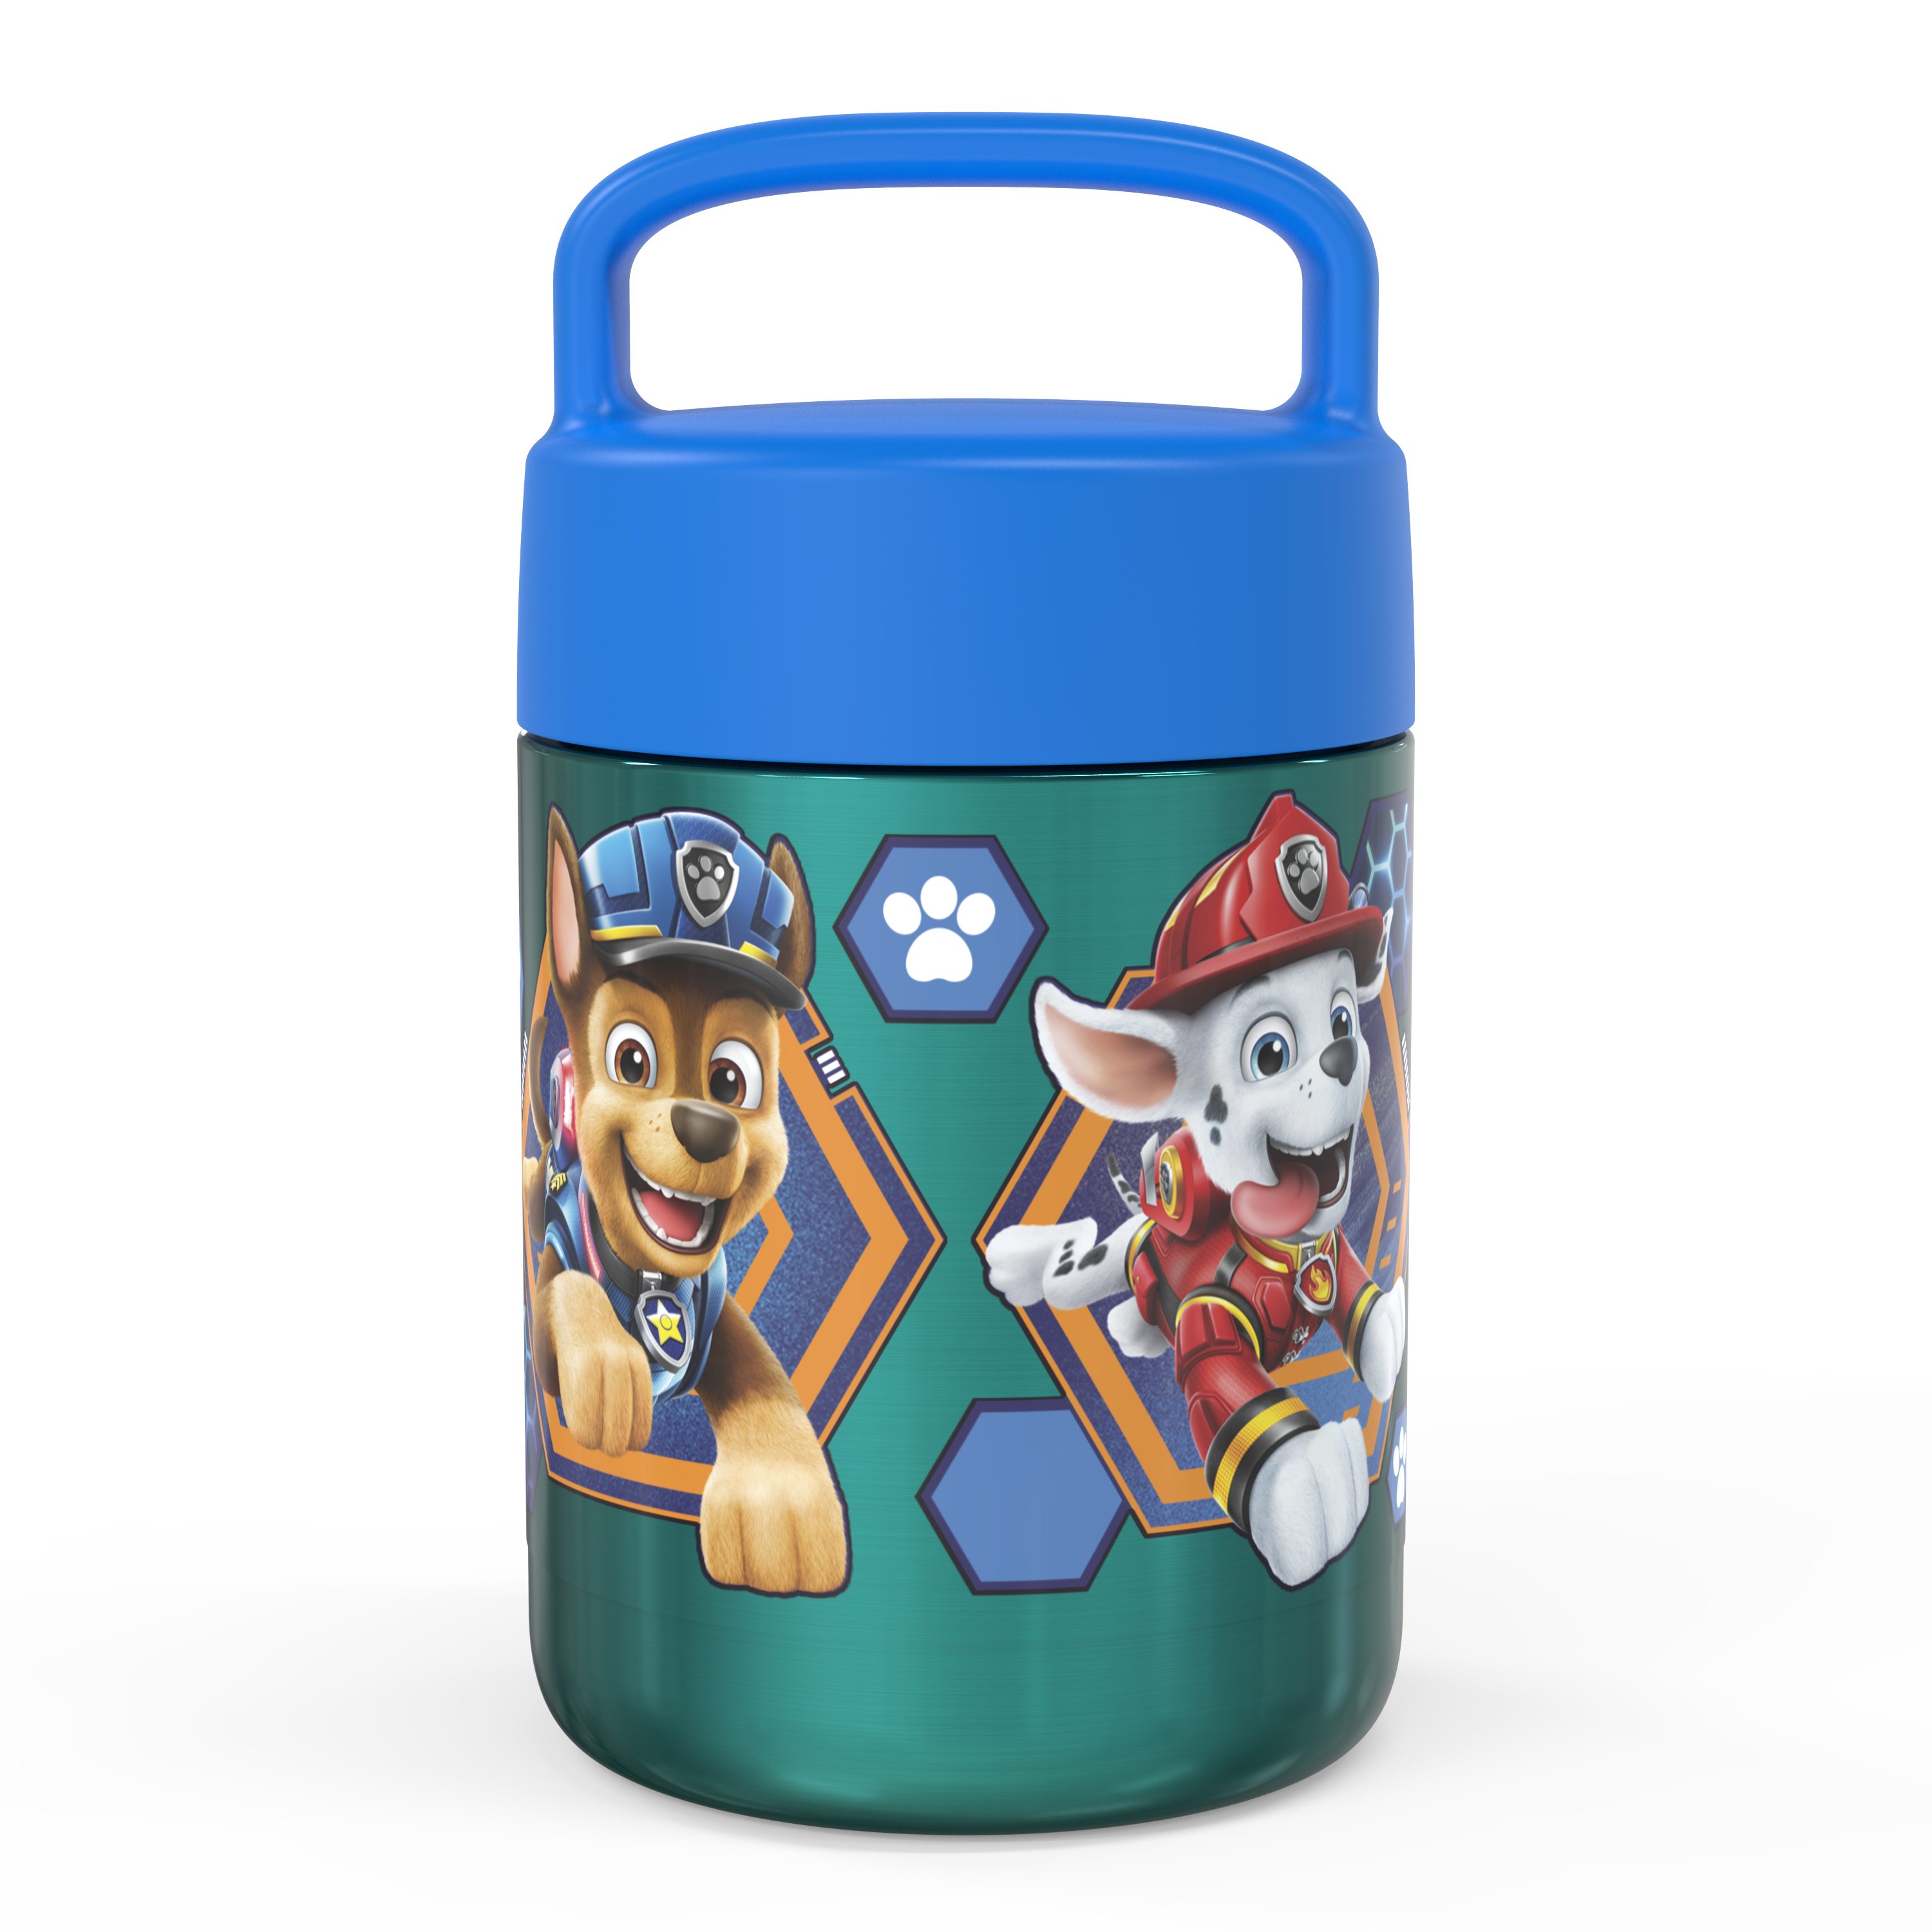 Paw Patrol Movie Reusable Vacuum Insulated Stainless Steel Food Container, Marshall, Chase and Friends slideshow image 1